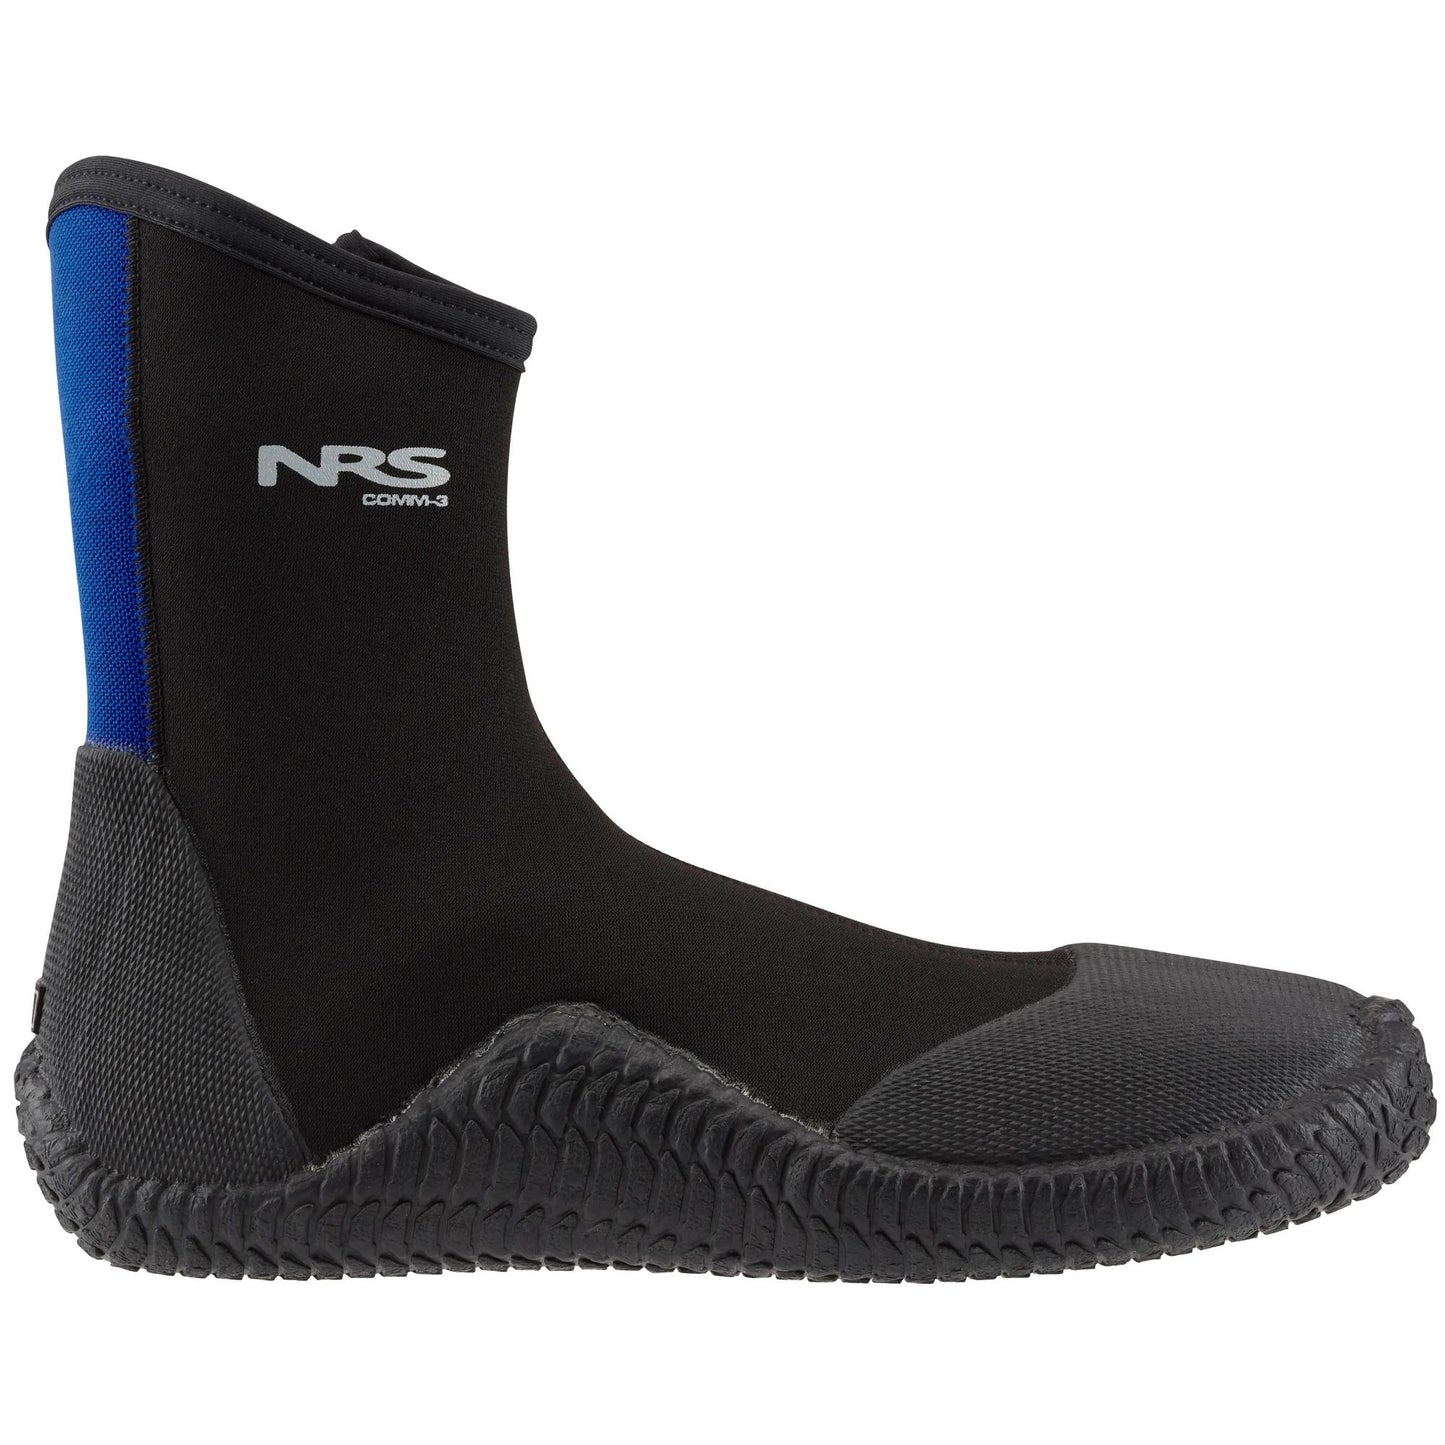 Stay steady on slippery surfaces with the NRS men's neoprene scuba boot. Great alternative to the NRS Comm-3 Youth Wetshoe, this neoprene booty provides great traction